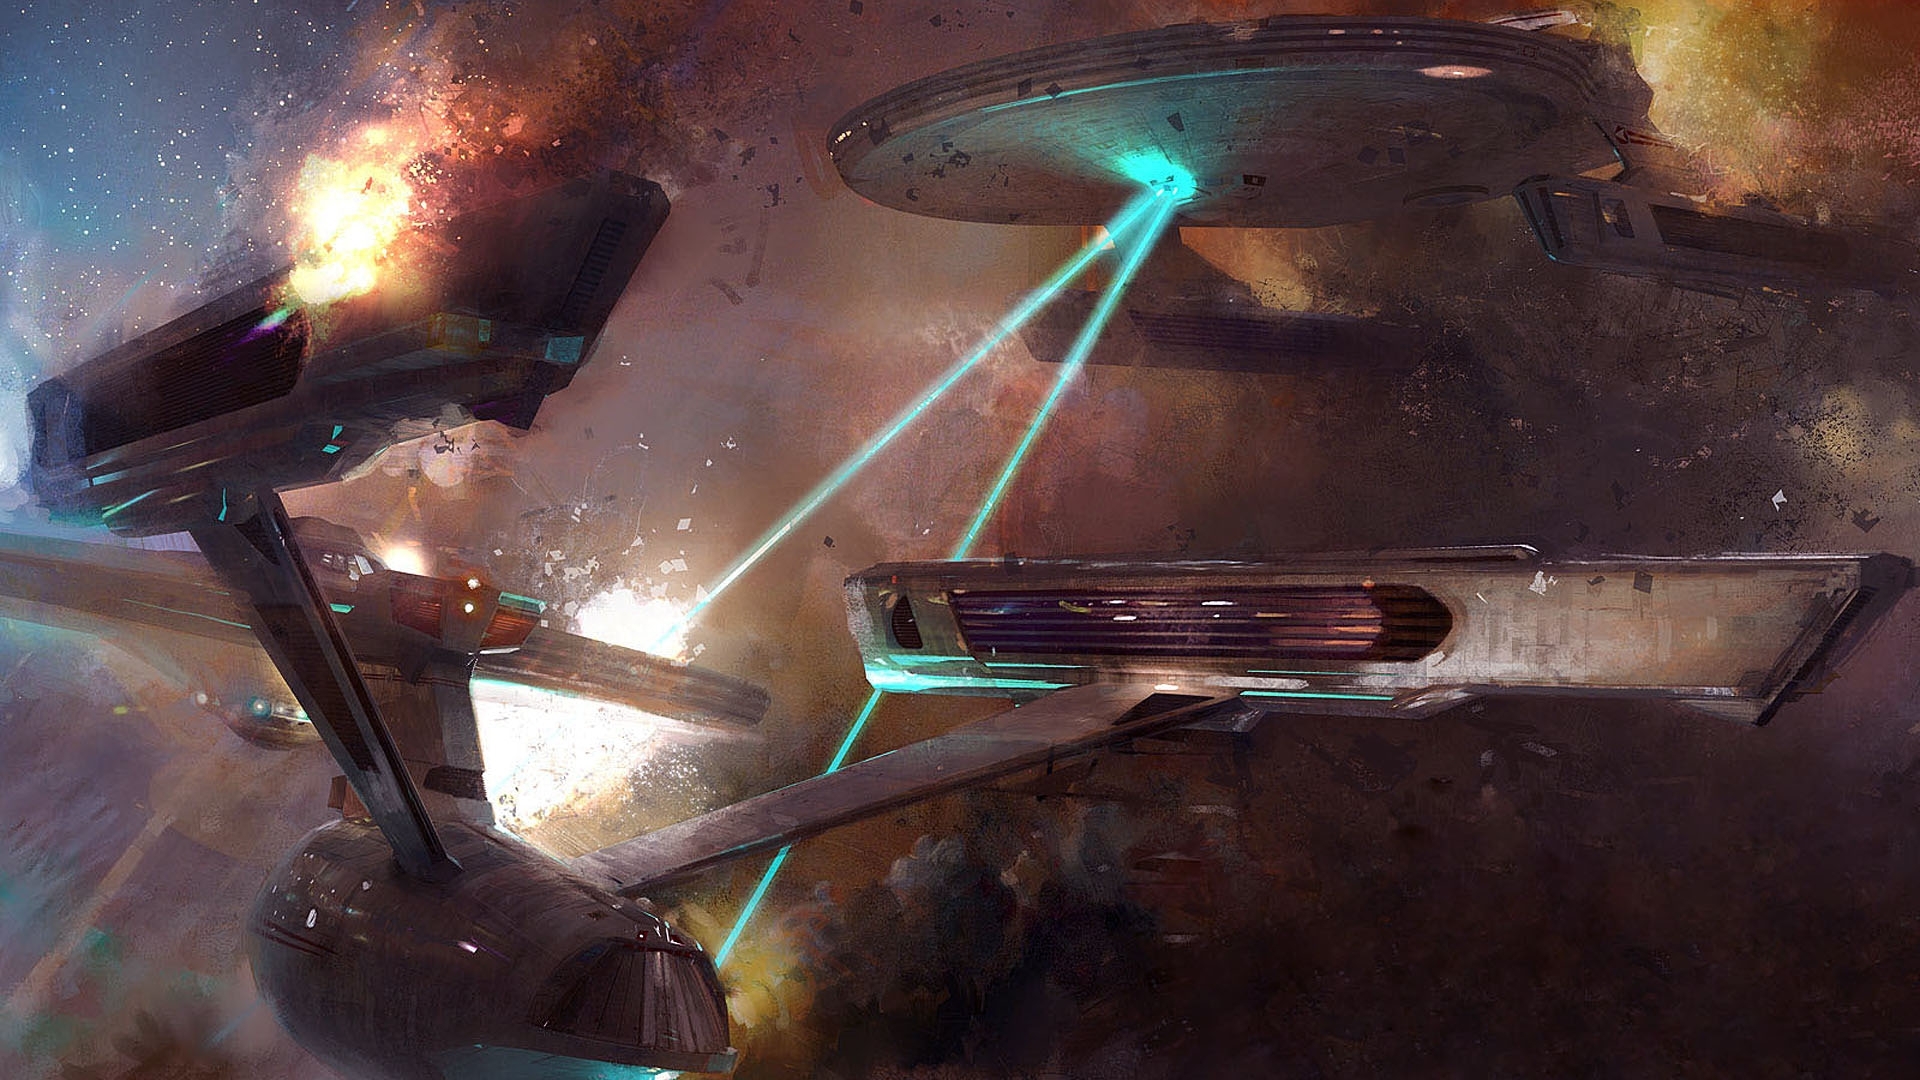 A depiction of a thrilling space battle between a Star Trek ship and an alien vessel.